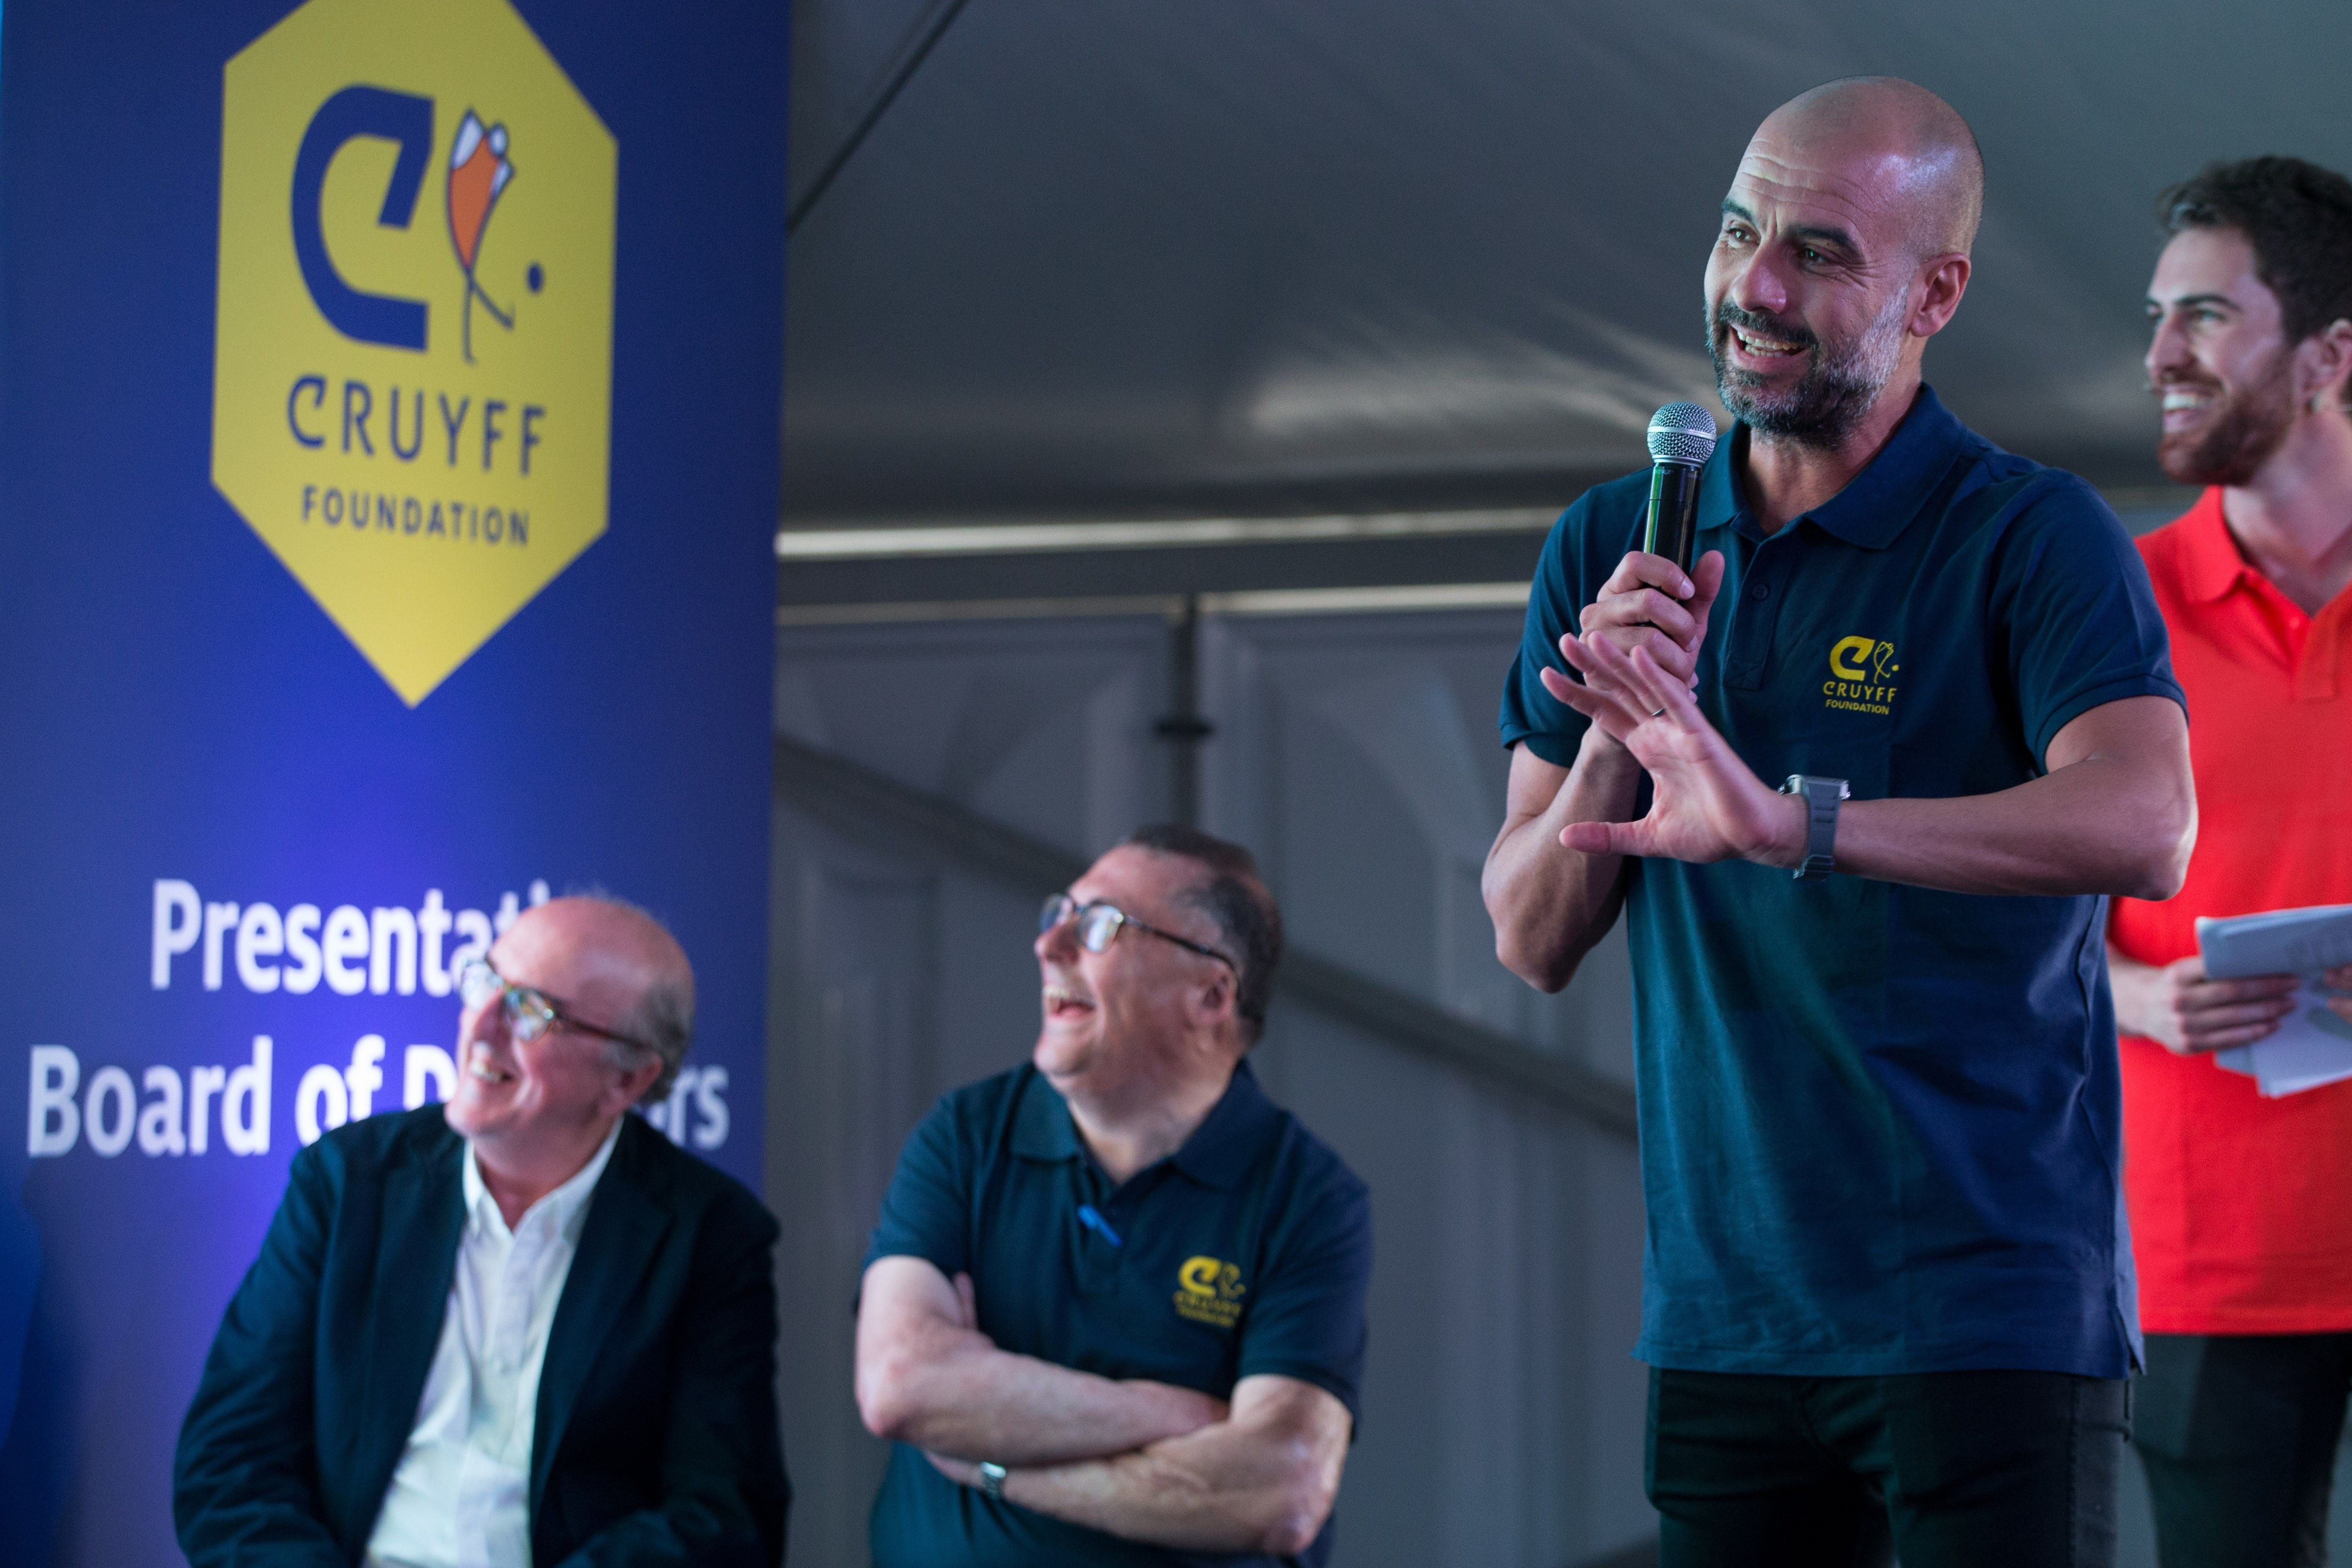 Guardiola, hopeful about the new Spanish government